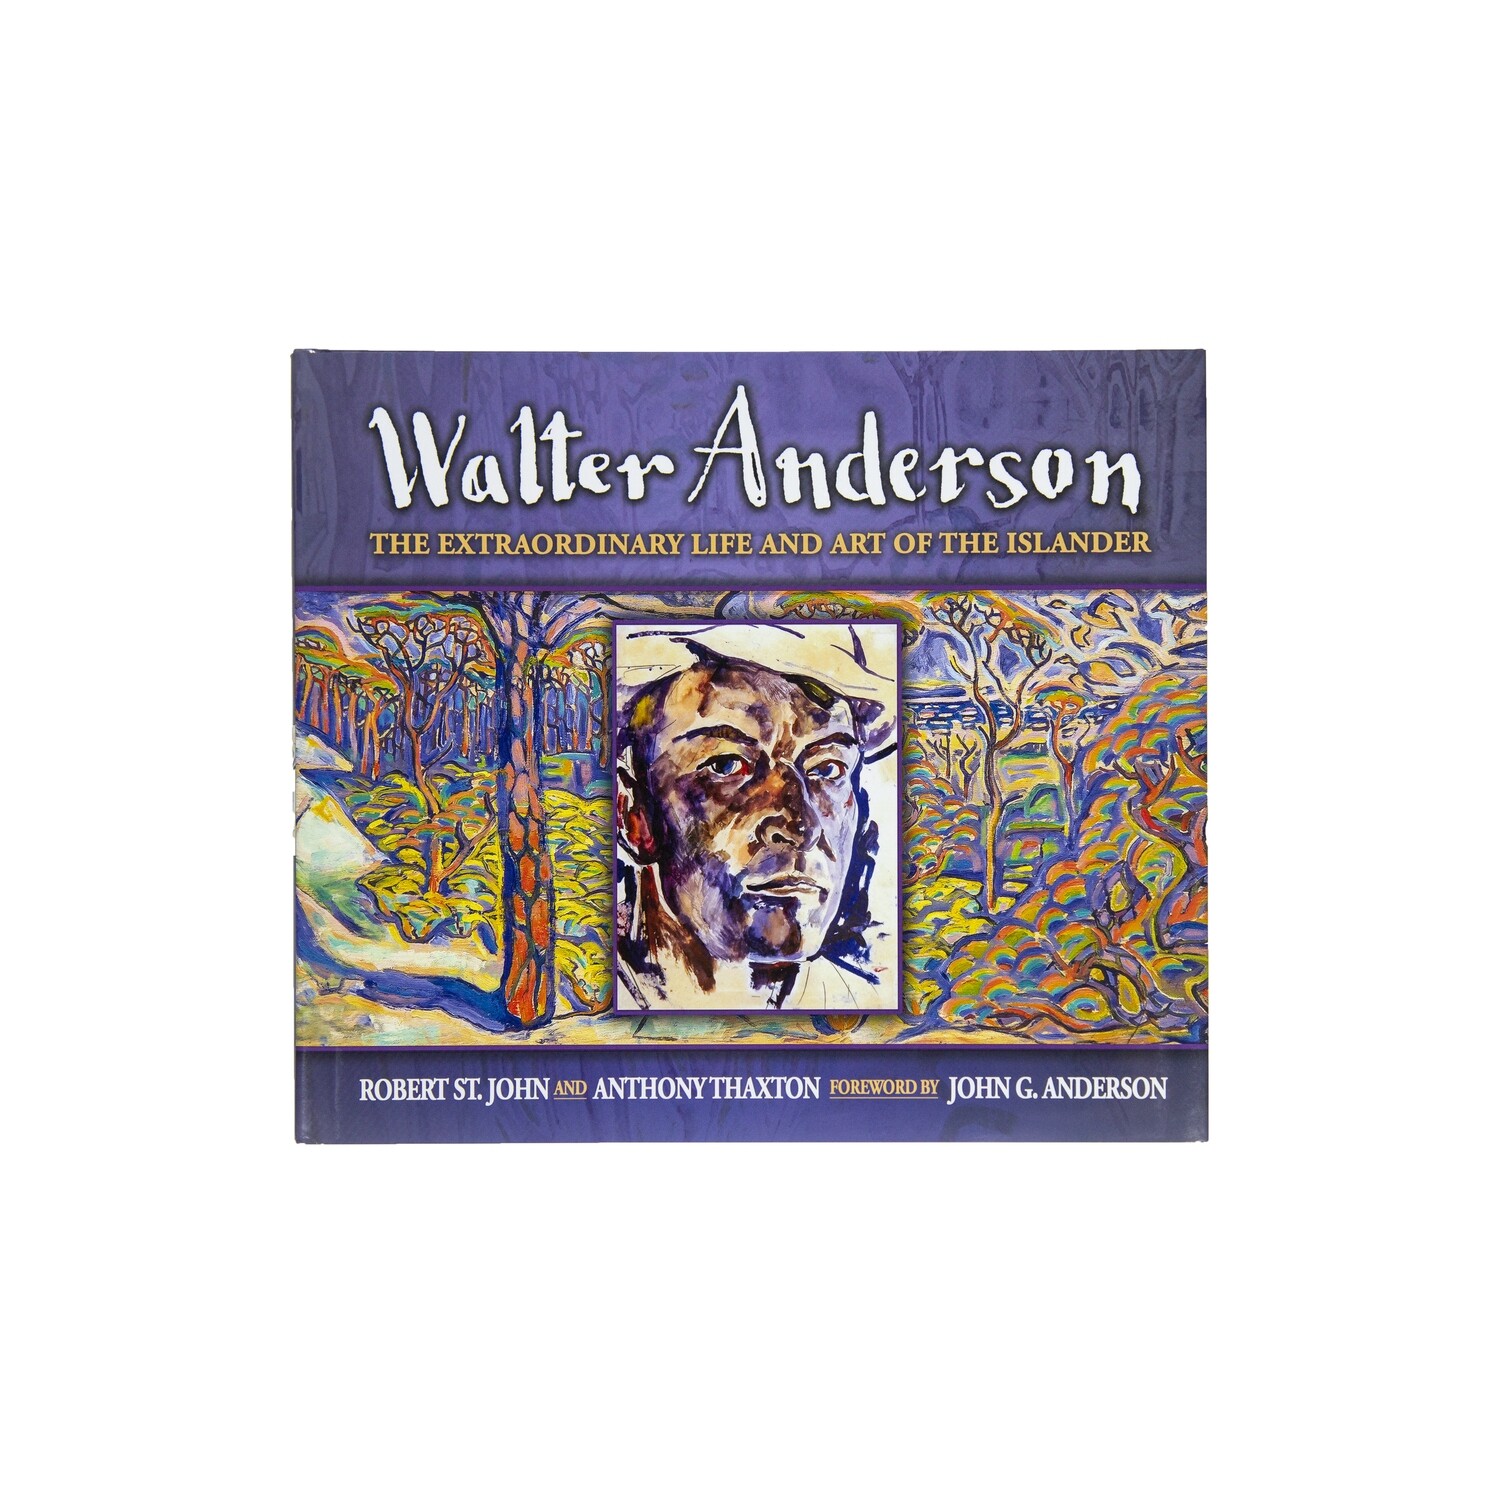 WALTER ANDERSON: THE EXTRAORDINARY LIFE AND ART OF THE ISLANDER